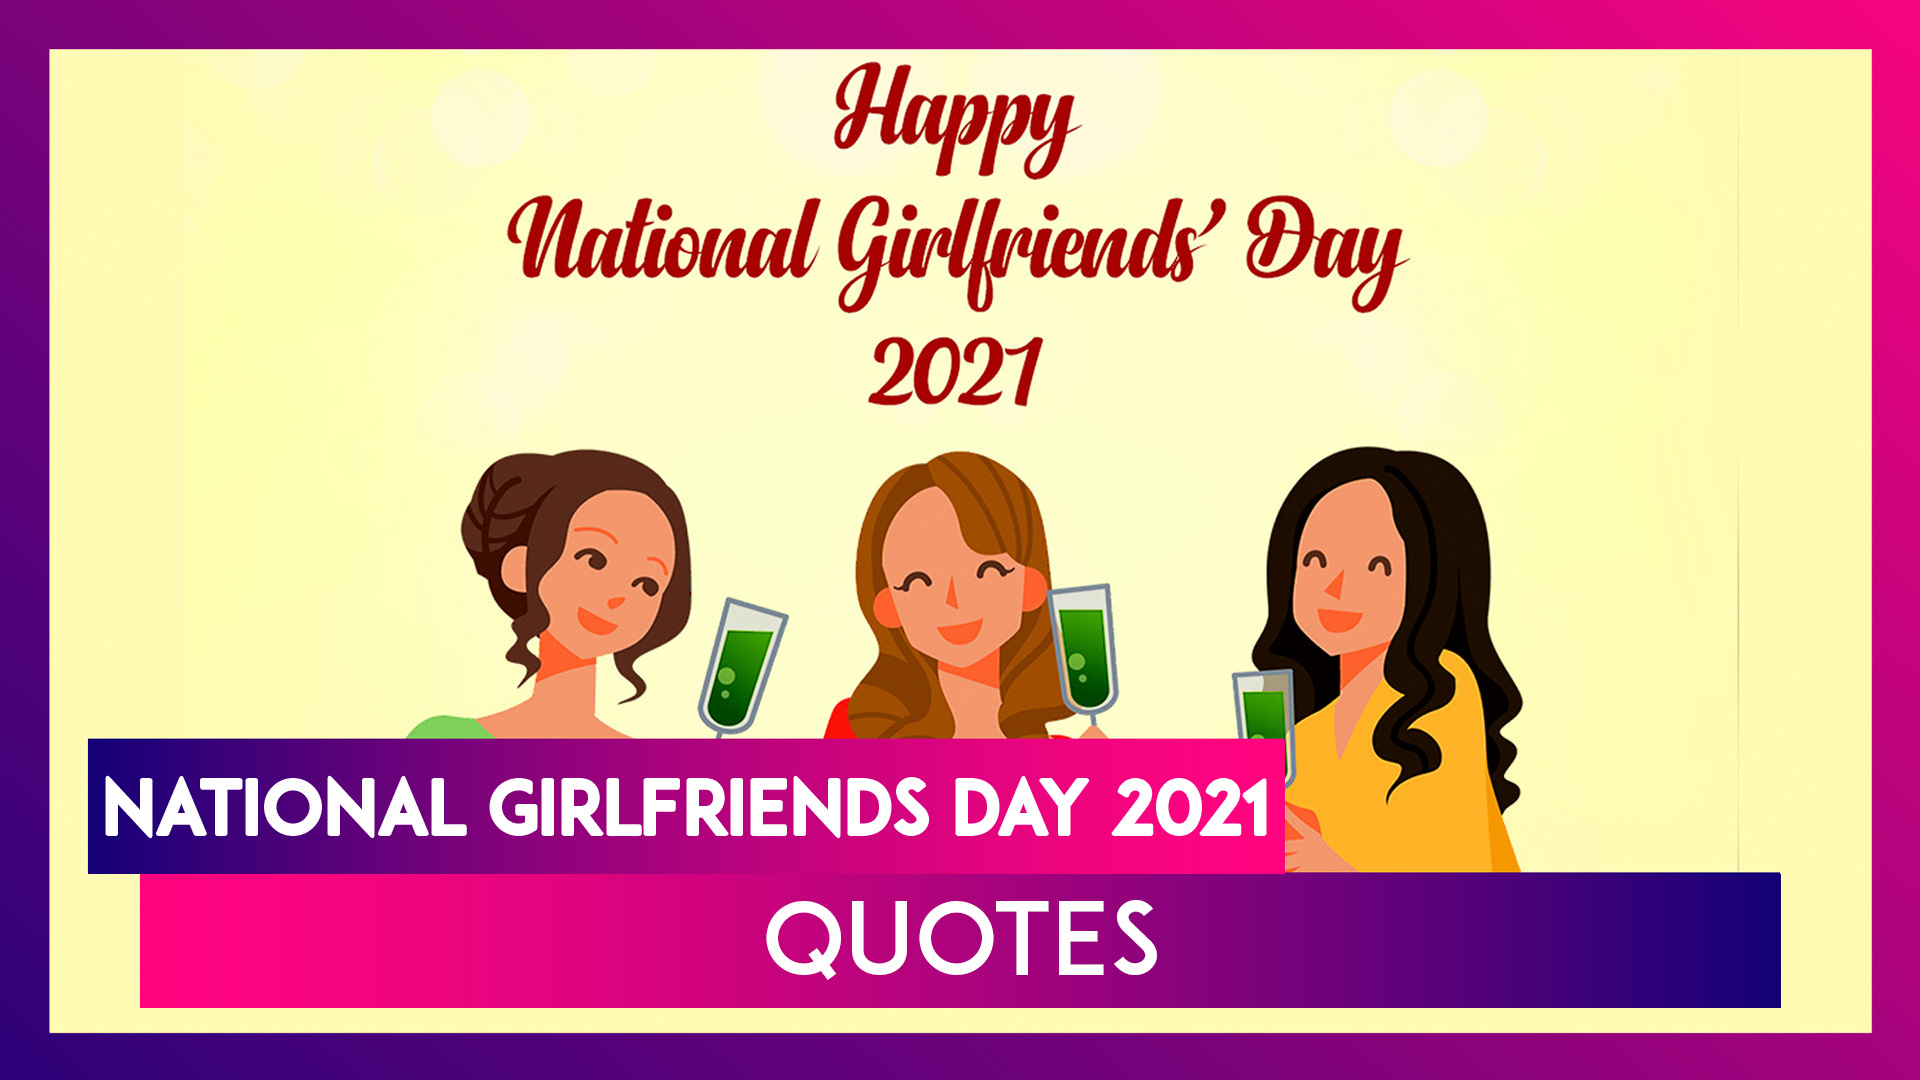 Happy National Girlfriends Day 1 National girlfriends day is a day